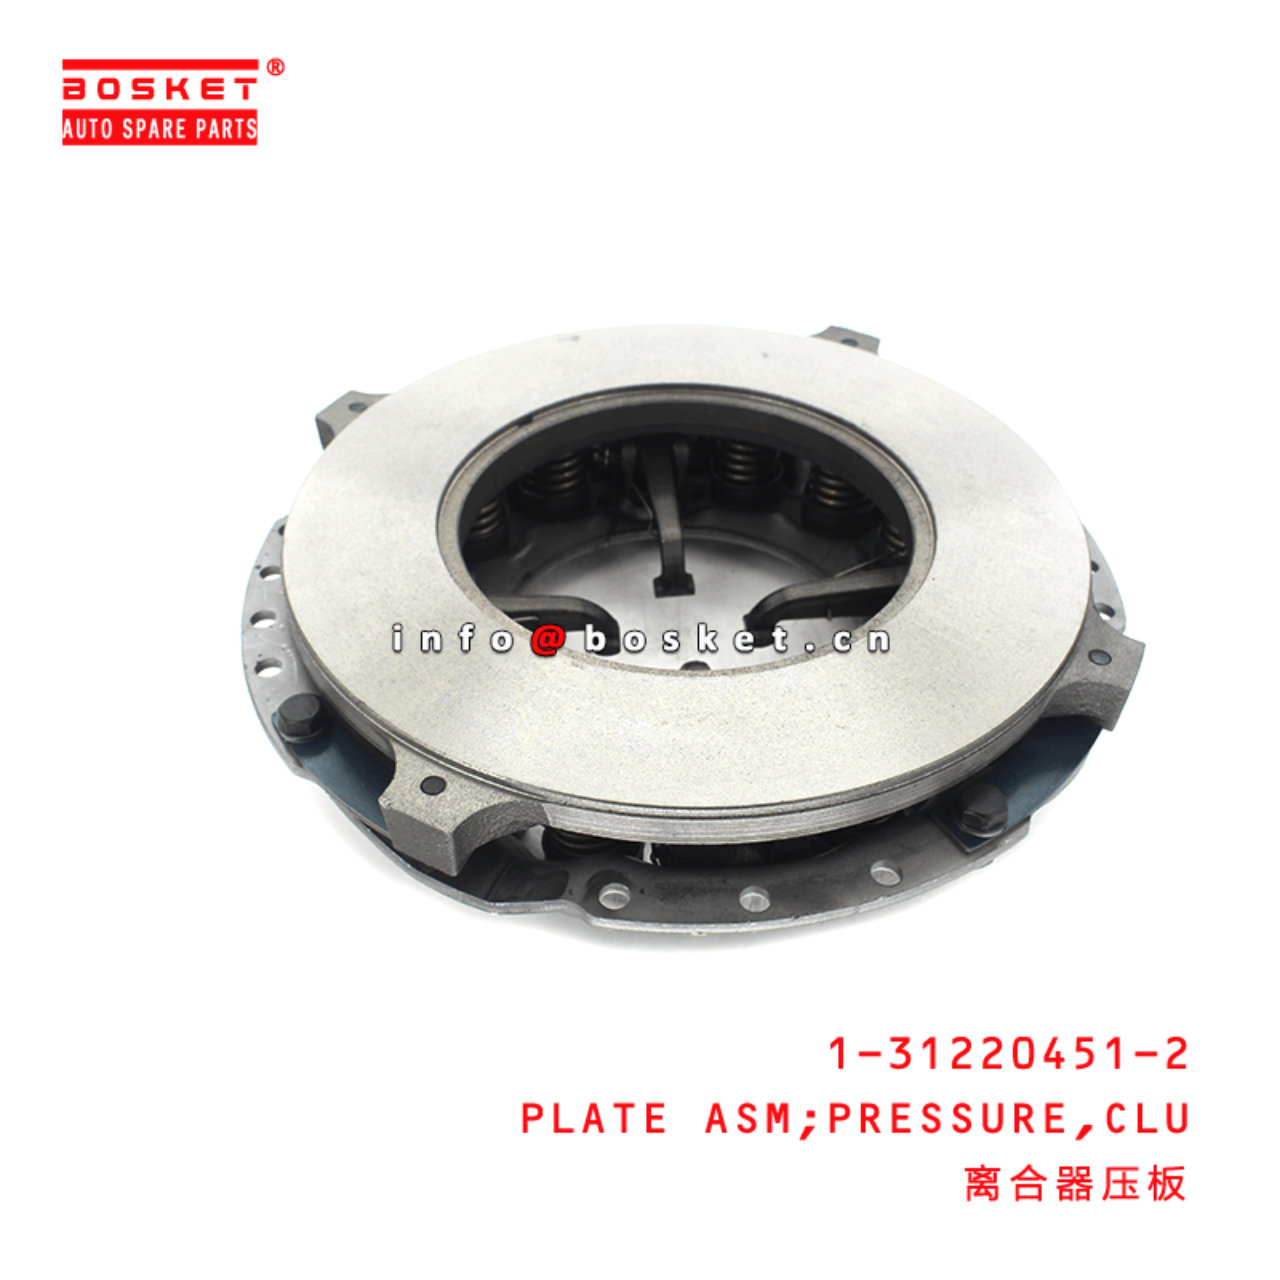  1-31220451-2 Clutch Pressure Plate Assembly 1312204512 Suitable for ISUZU FSR